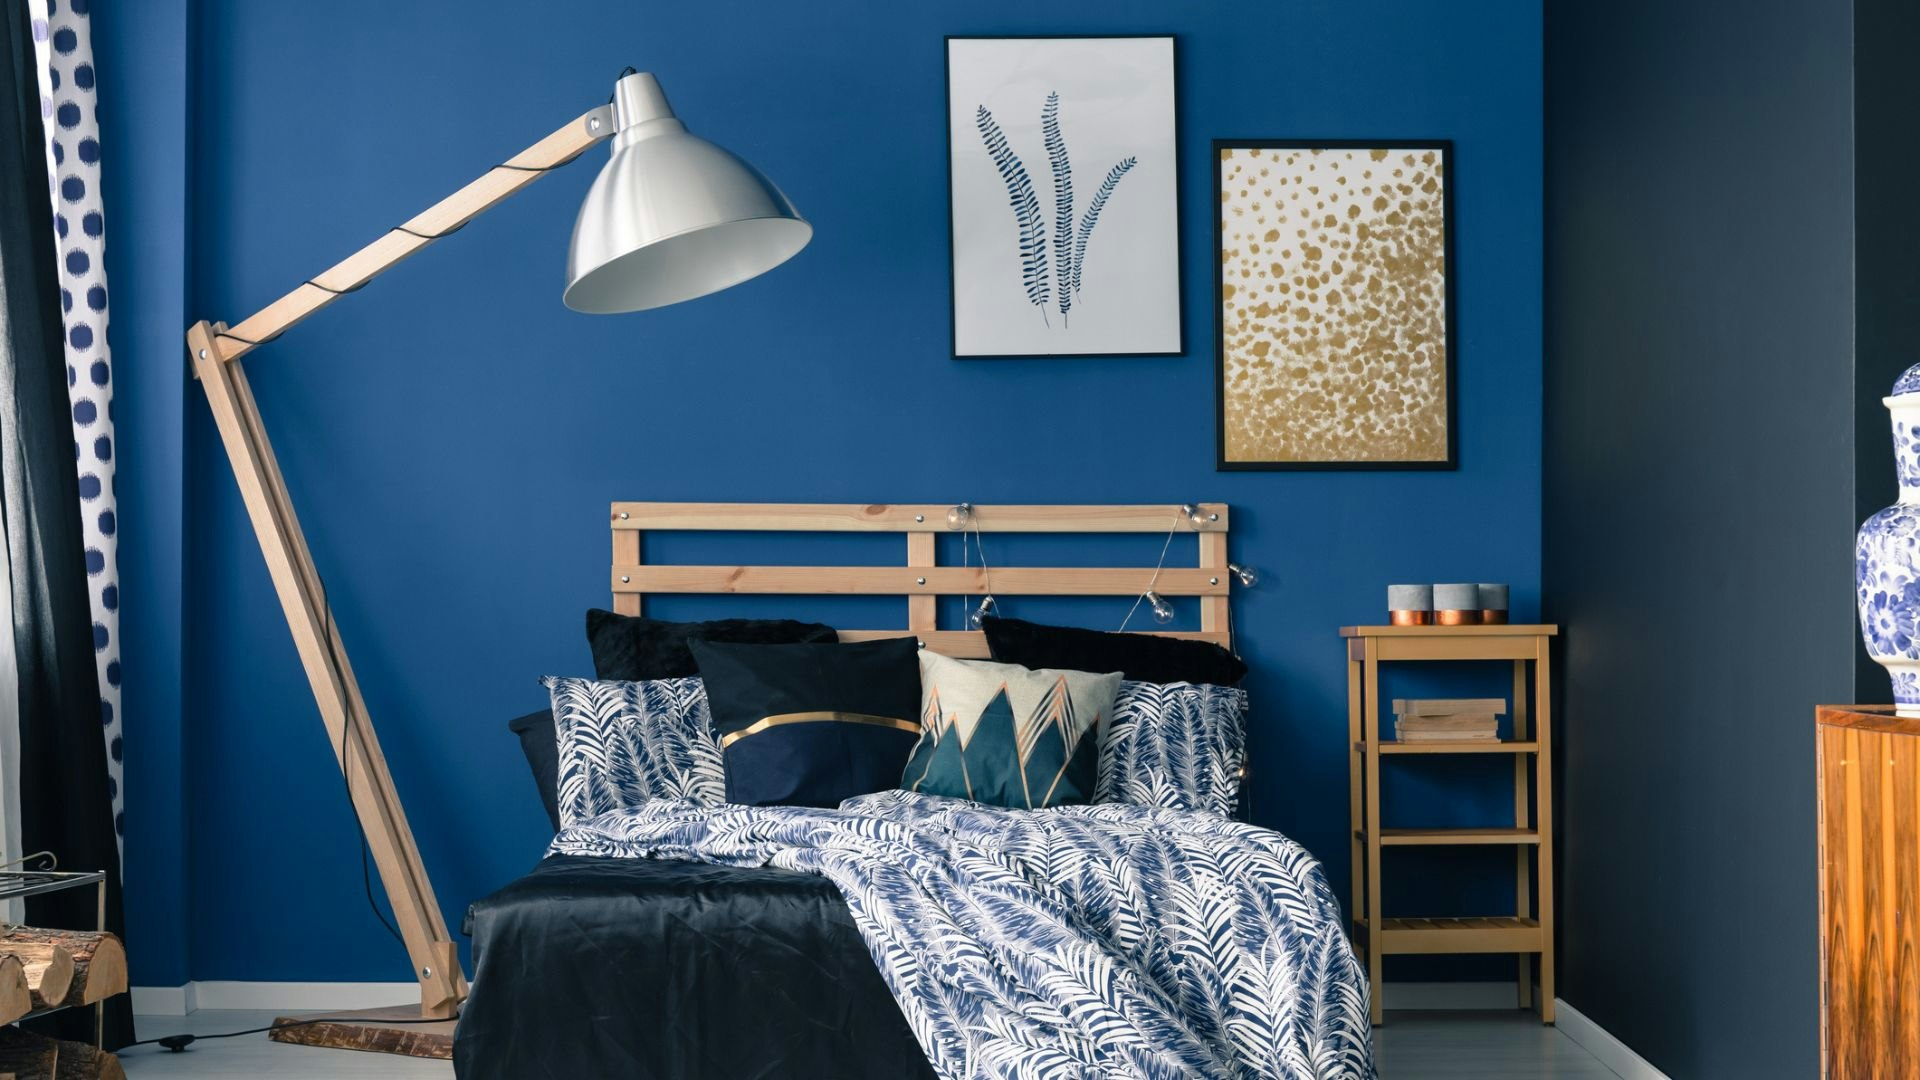 Navy bedroom ideas: Add printed artwork to your wall